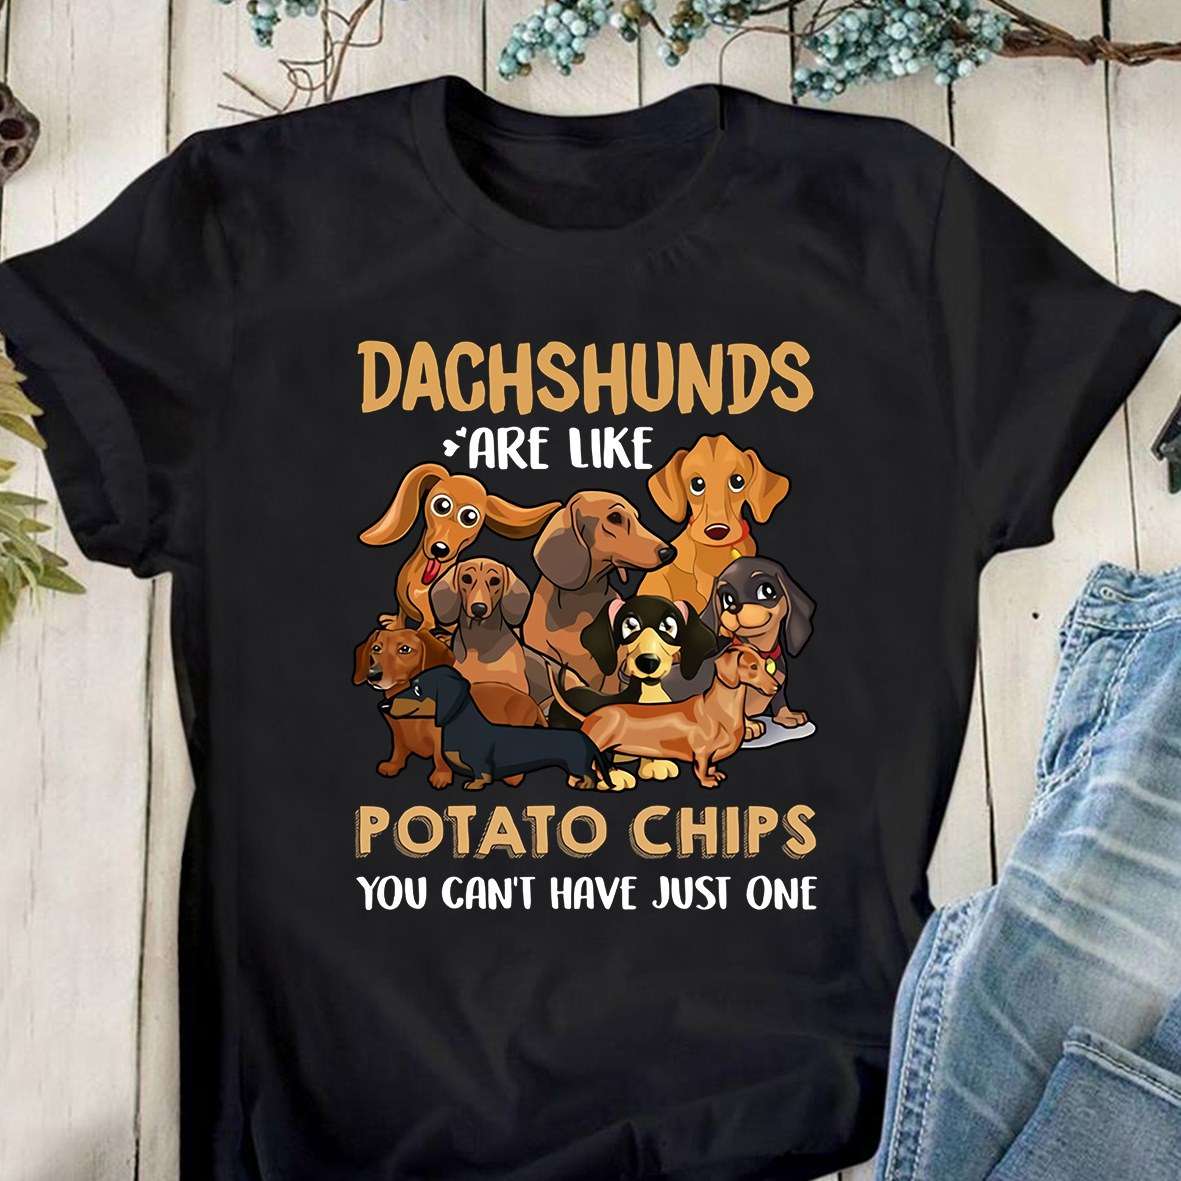 Dachshunds are like potato chips you can't have just one - Dachshund Dog